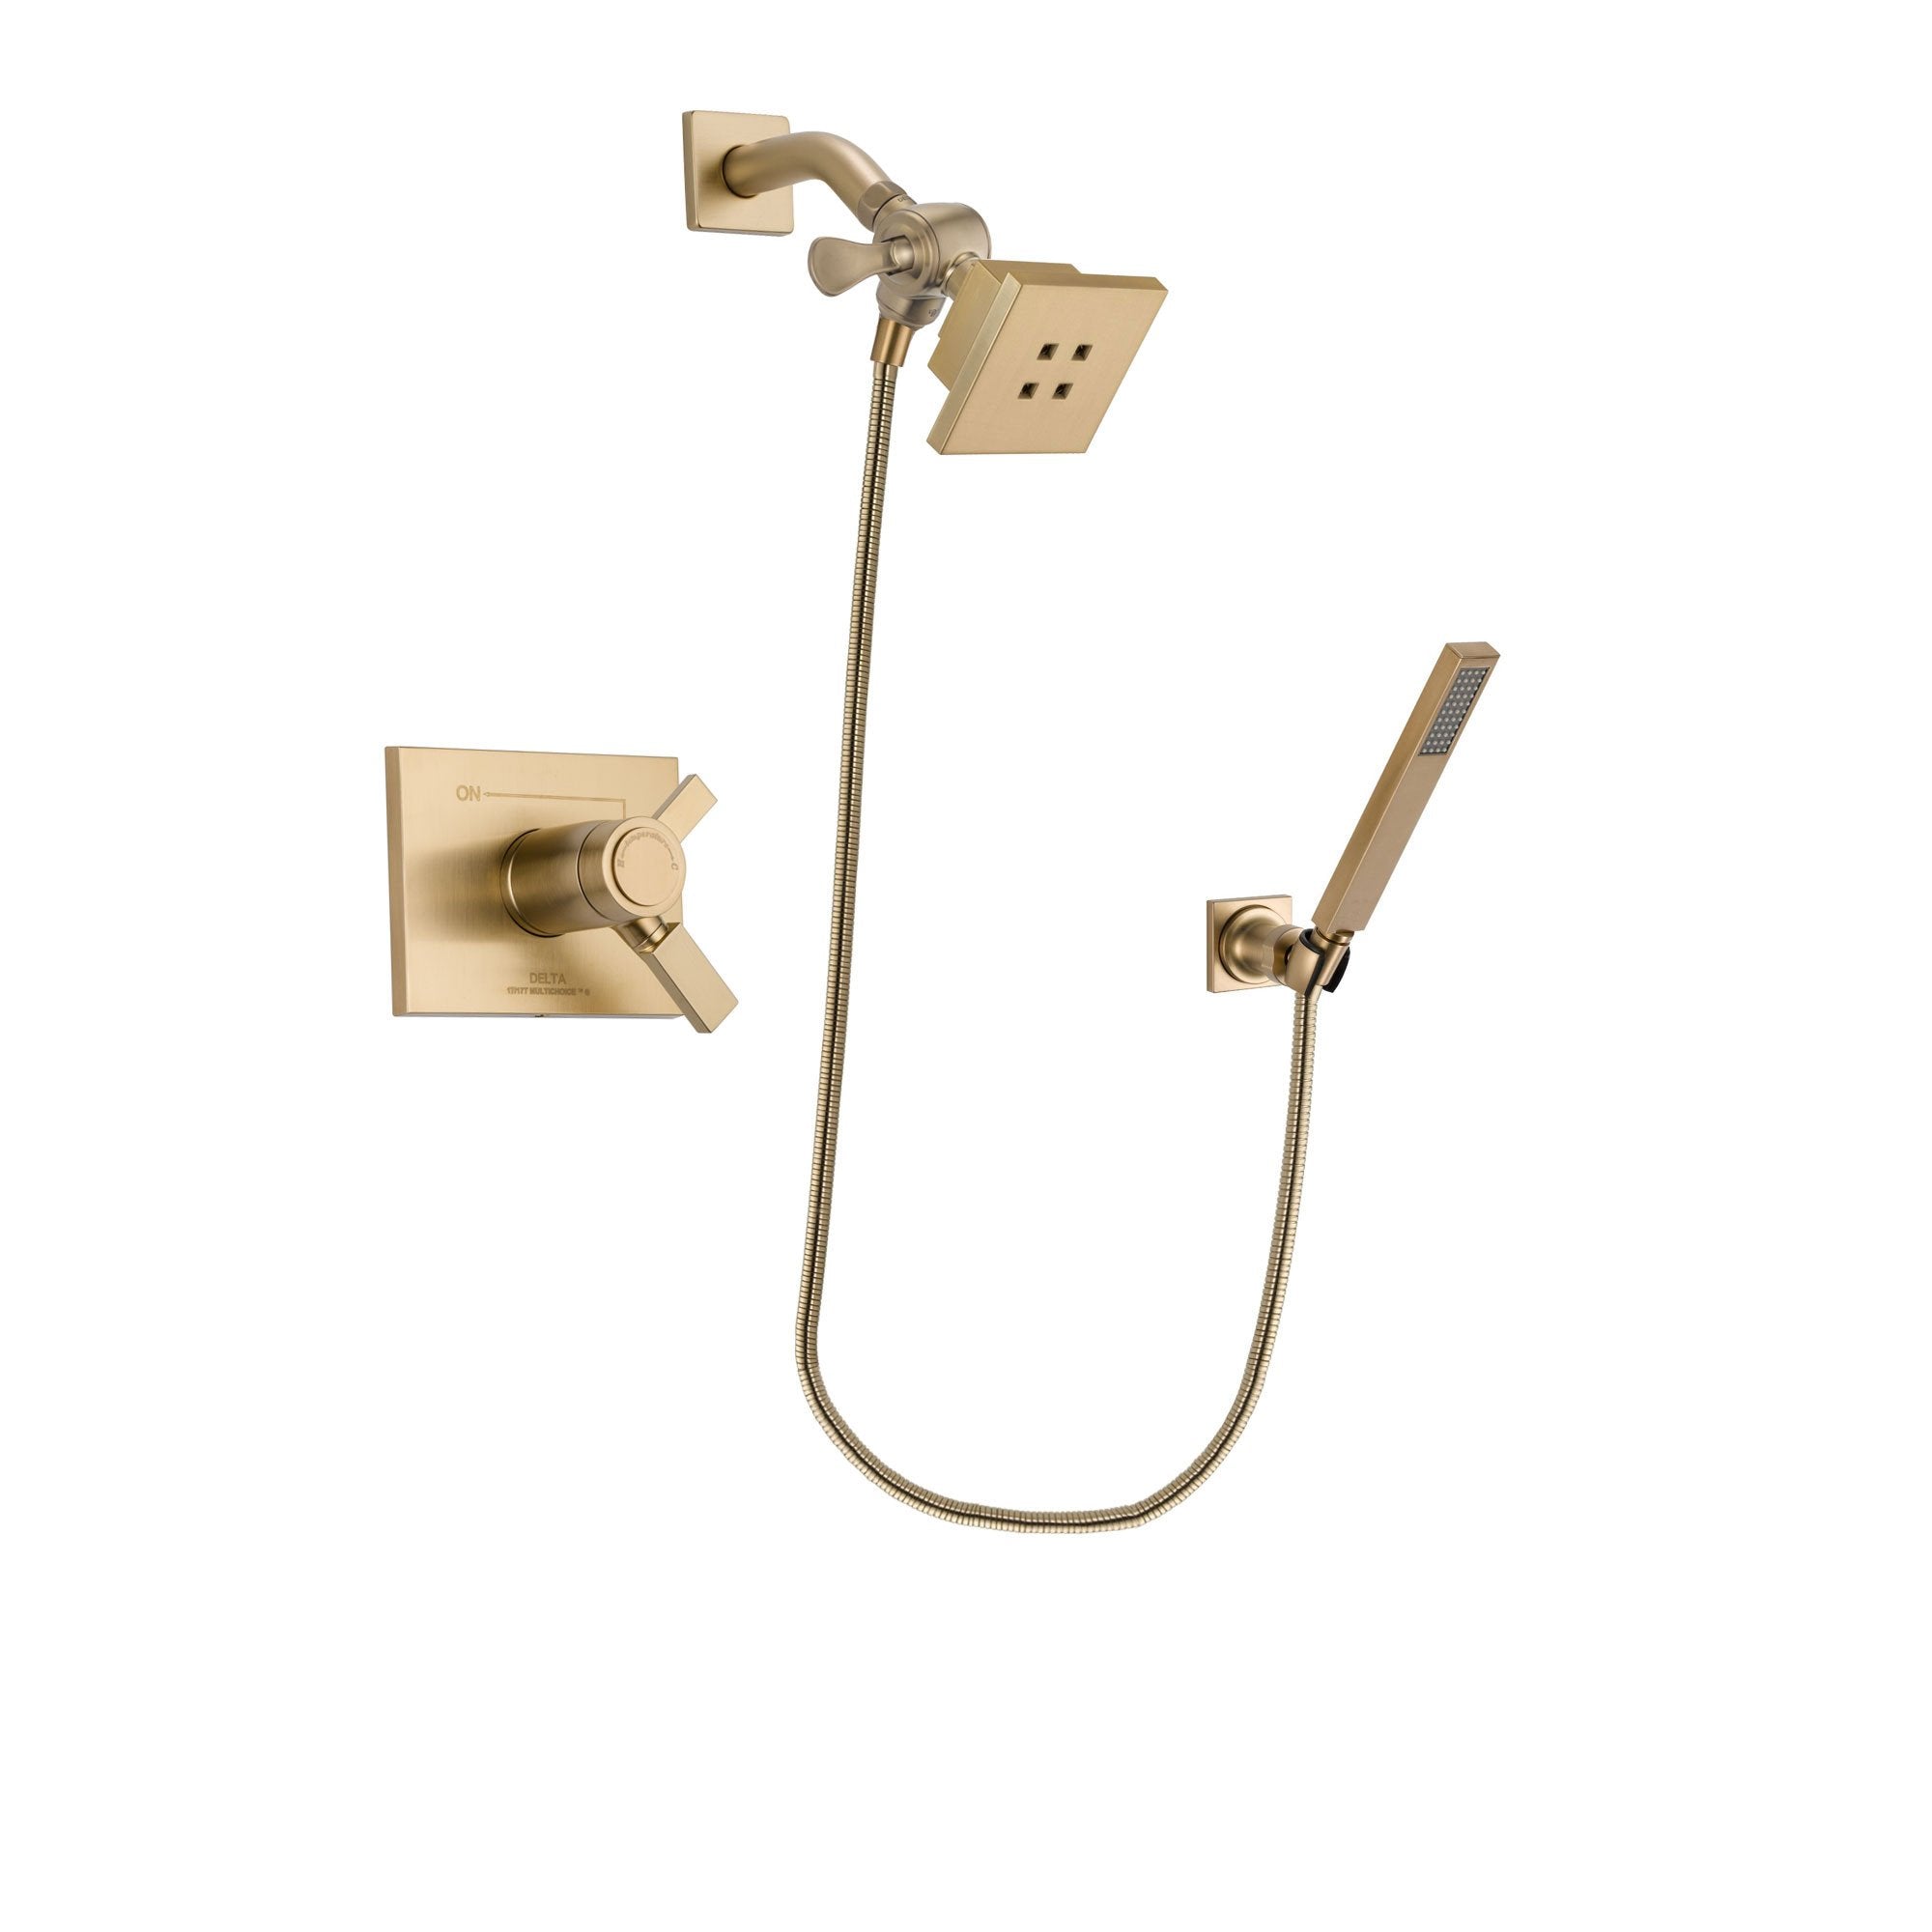 Delta Vero Champagne Bronze Finish Thermostatic Shower Faucet System Package with Square Showerhead and Modern Wall-Mount Handheld Shower Stick Includes Rough-in Valve DSP3876V